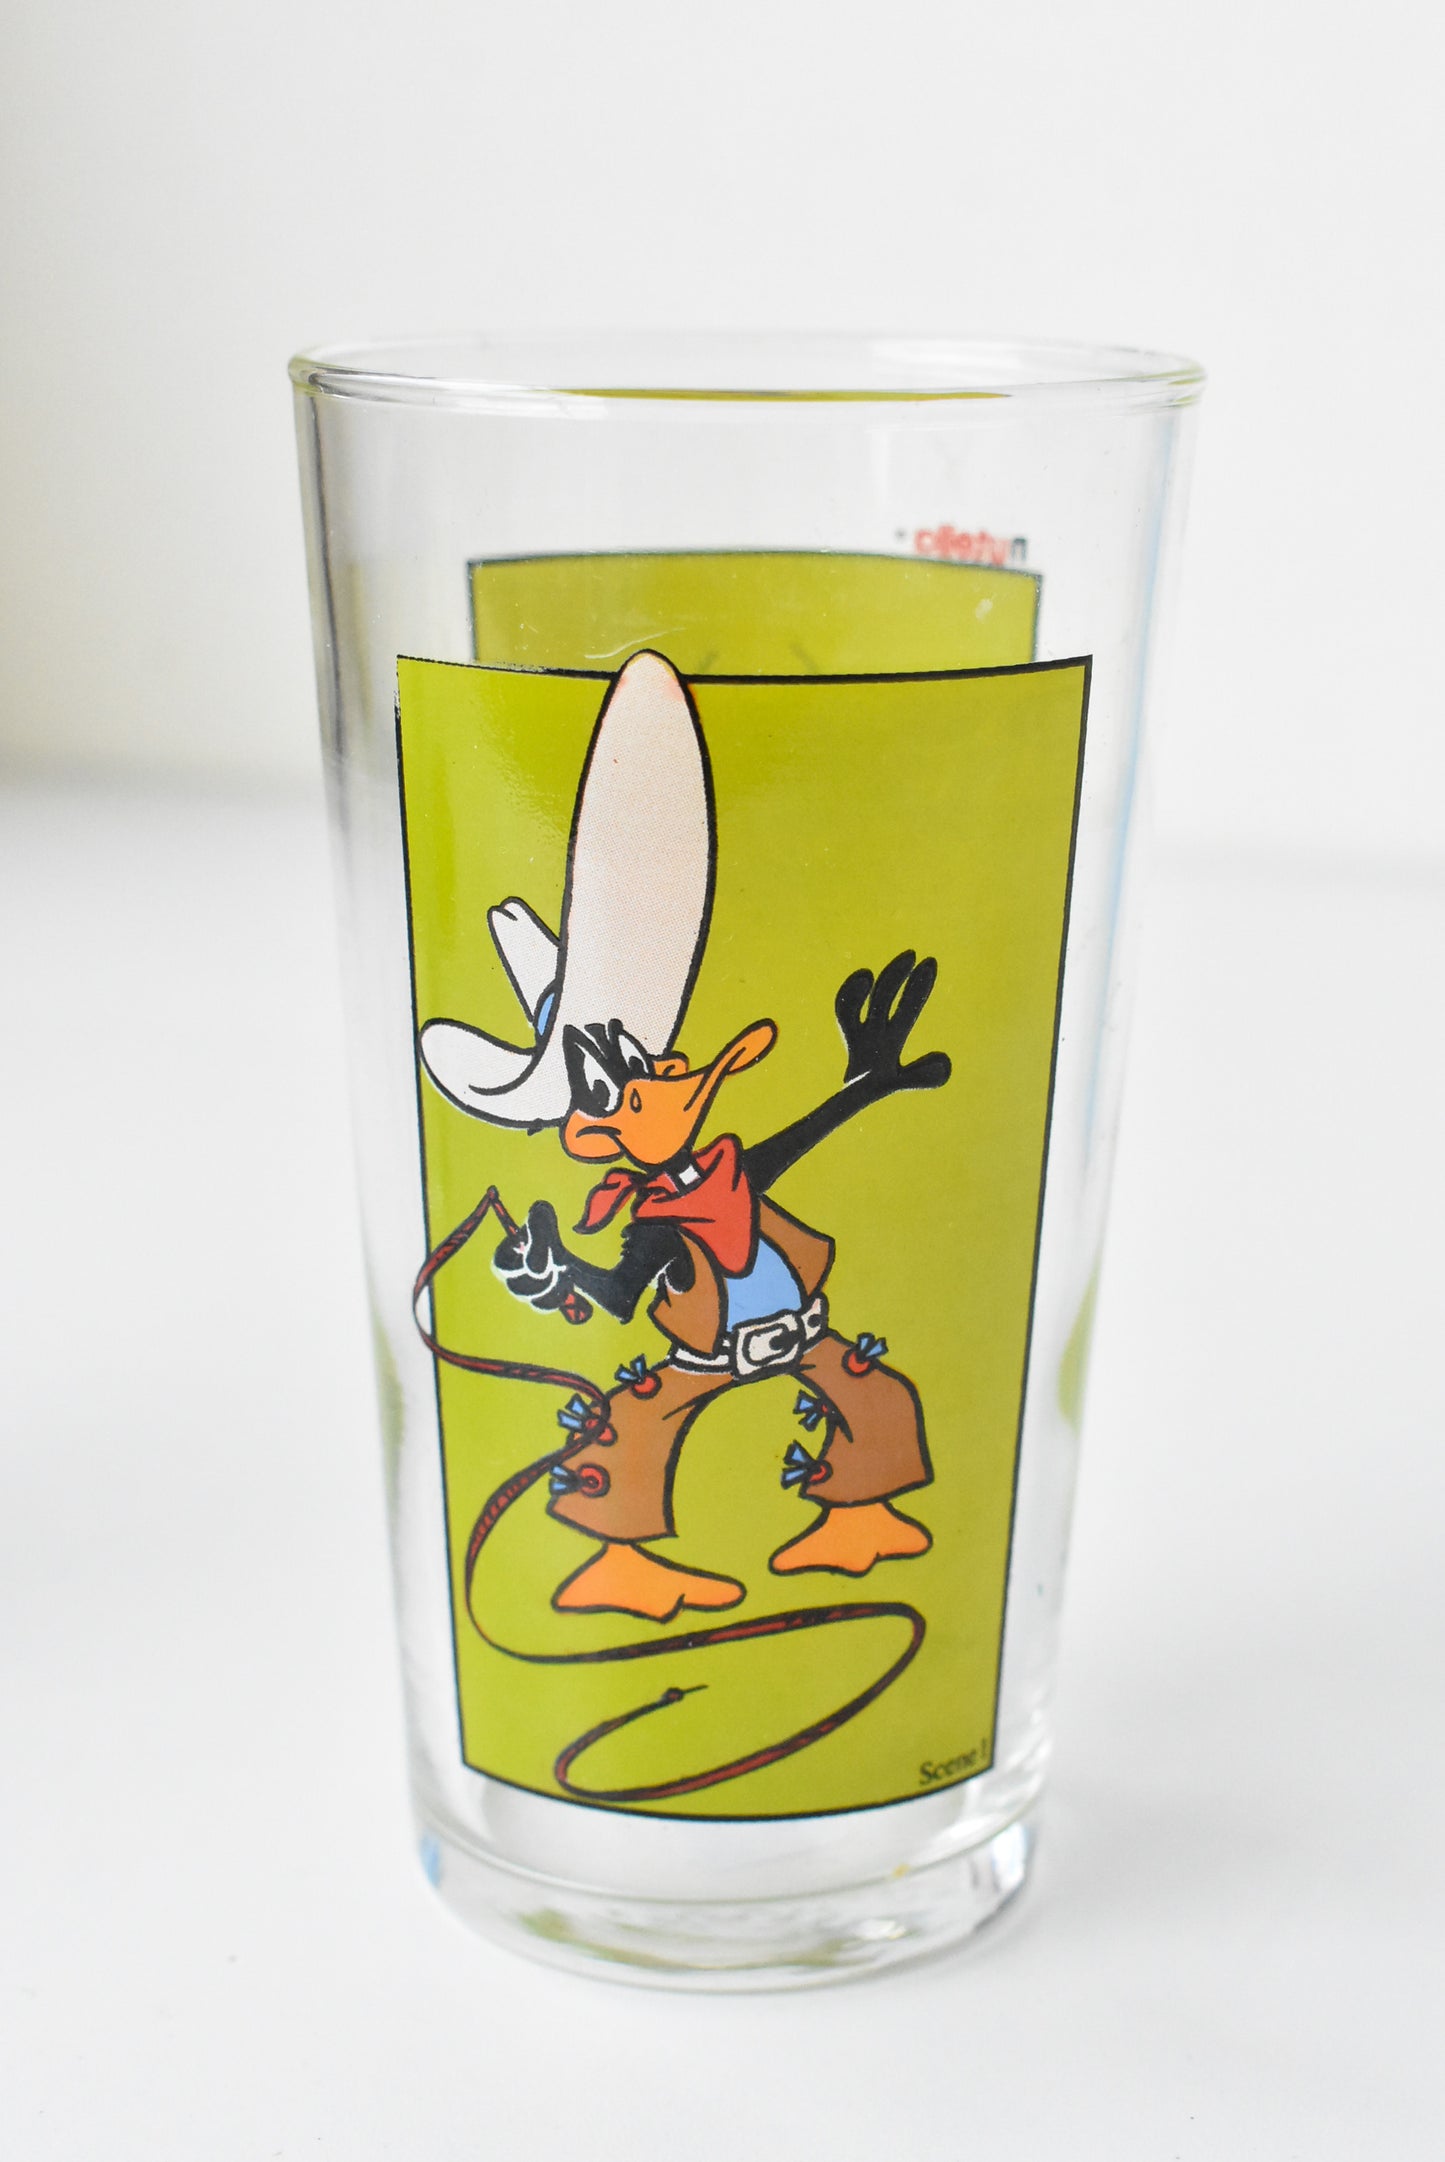 1992 Nutella collectible Looney Toones glasses (priced individually)